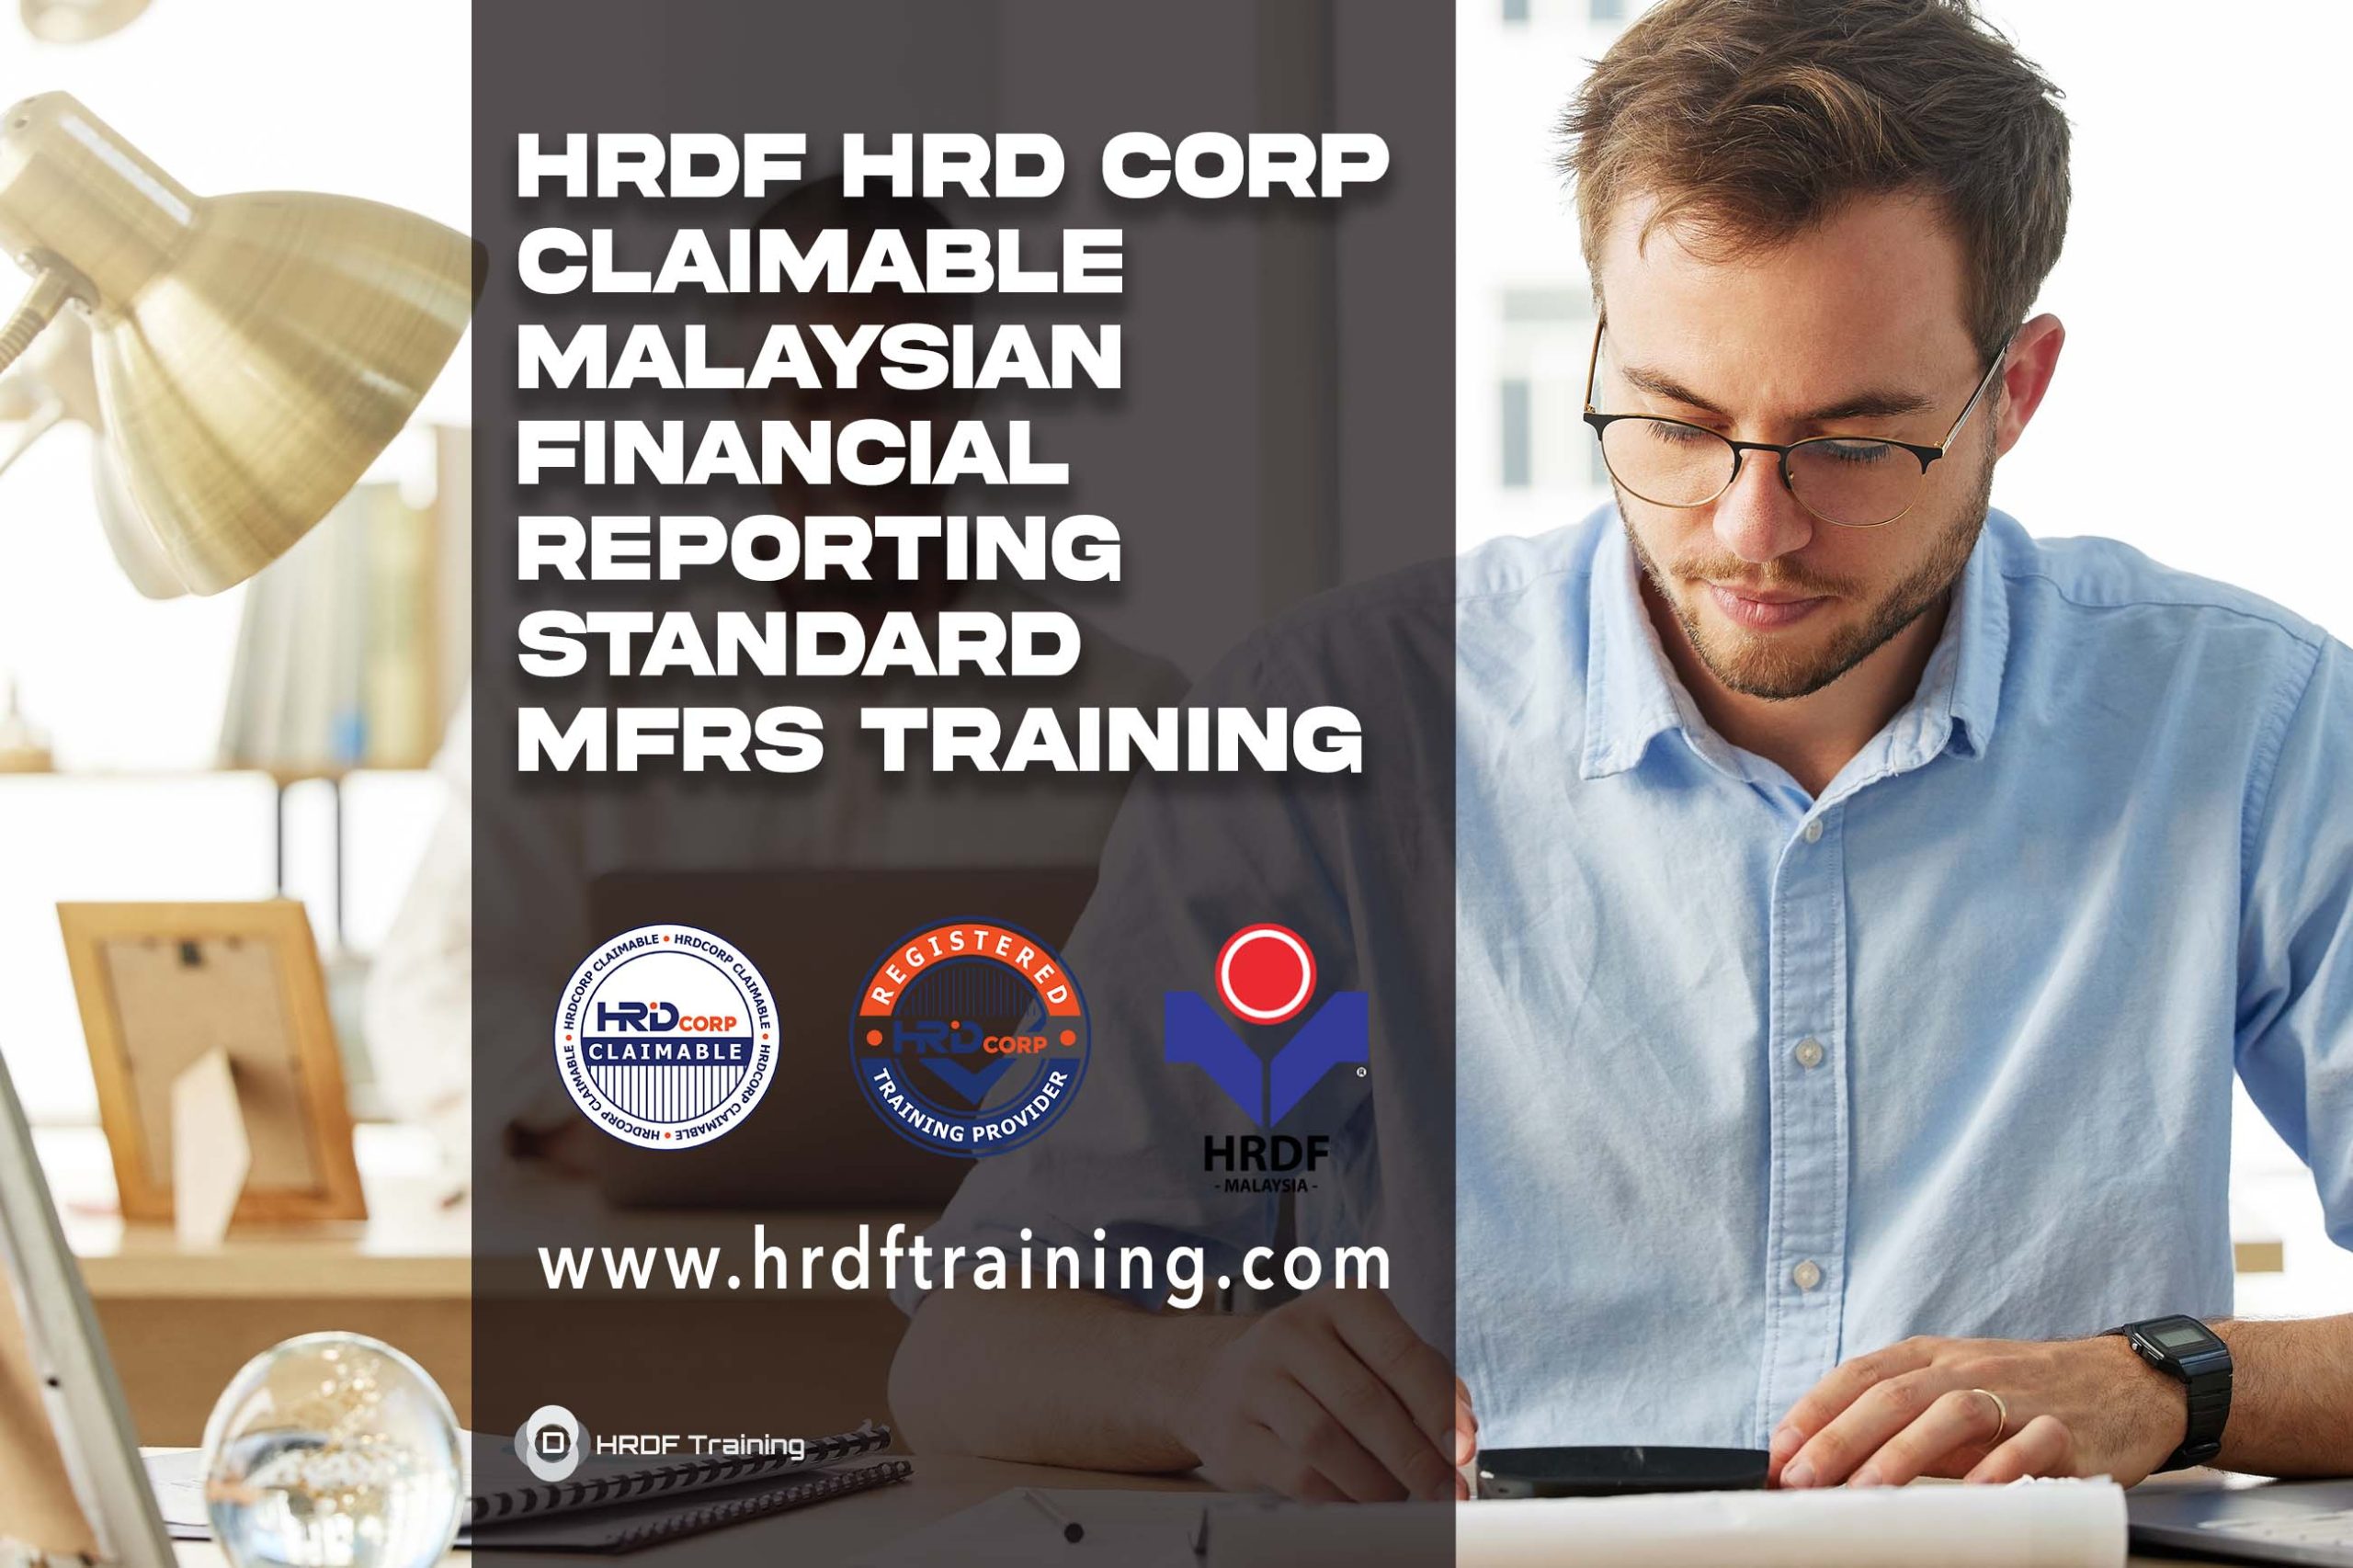 HRDF HRD Corp Claimable Malaysian Financial Reporting Standard MFRS Training